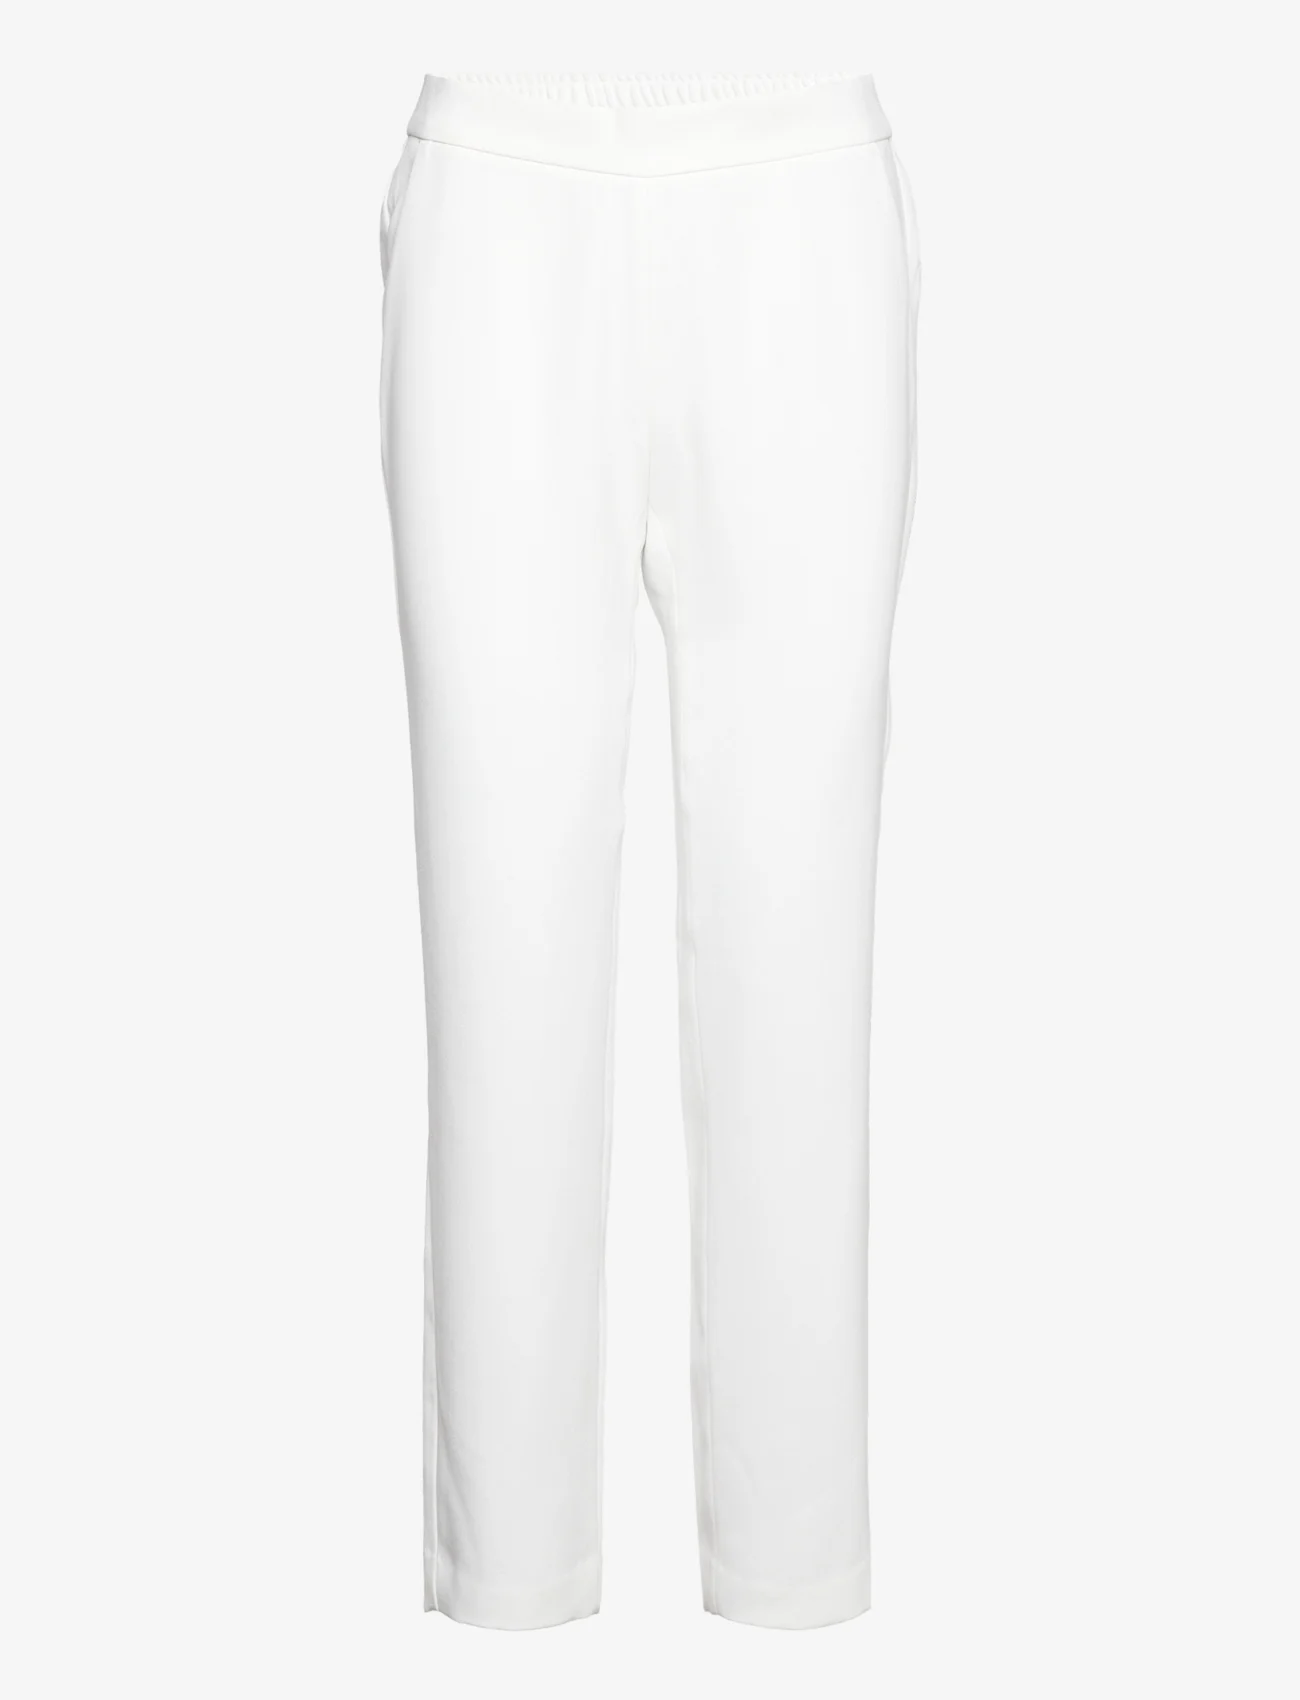 Marville Road - Mockingbird Trousers - off-white - 0